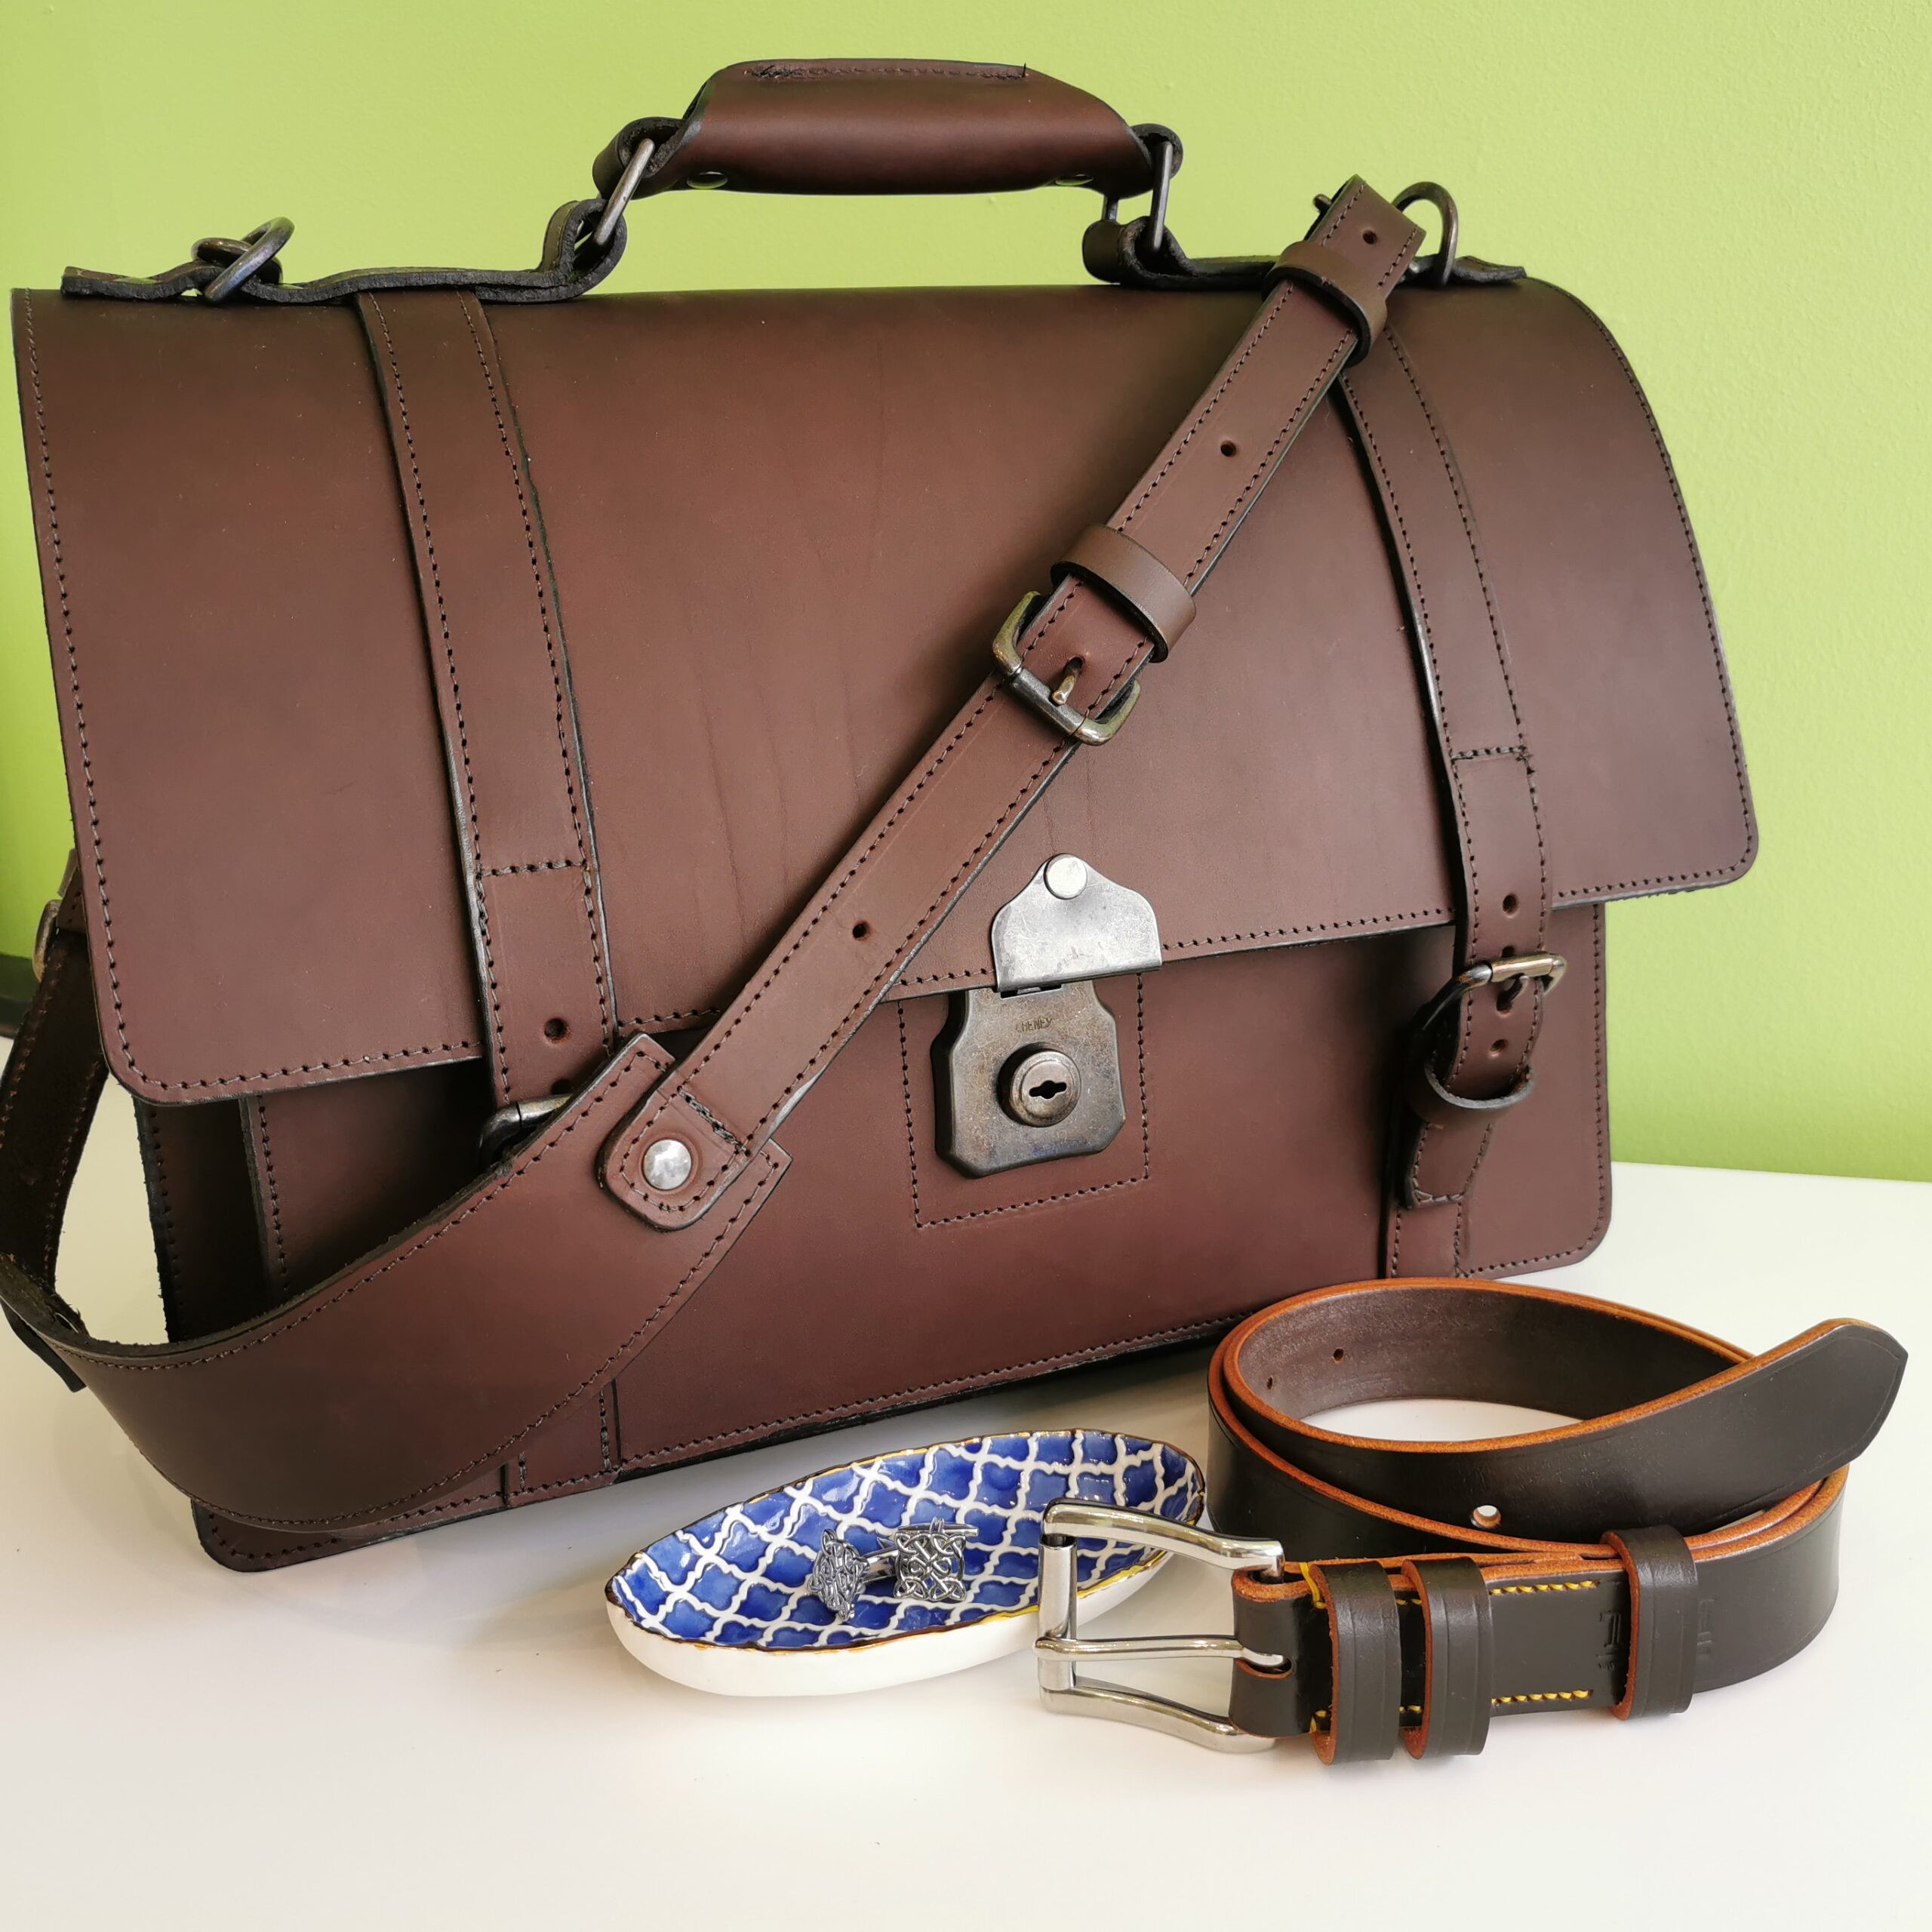 Brown and silver group picture of: The Full Monty briefcase, Dark Havana leather belt, Blue Alhambra porcelain trinket tray and Celtic Knot cufflinks